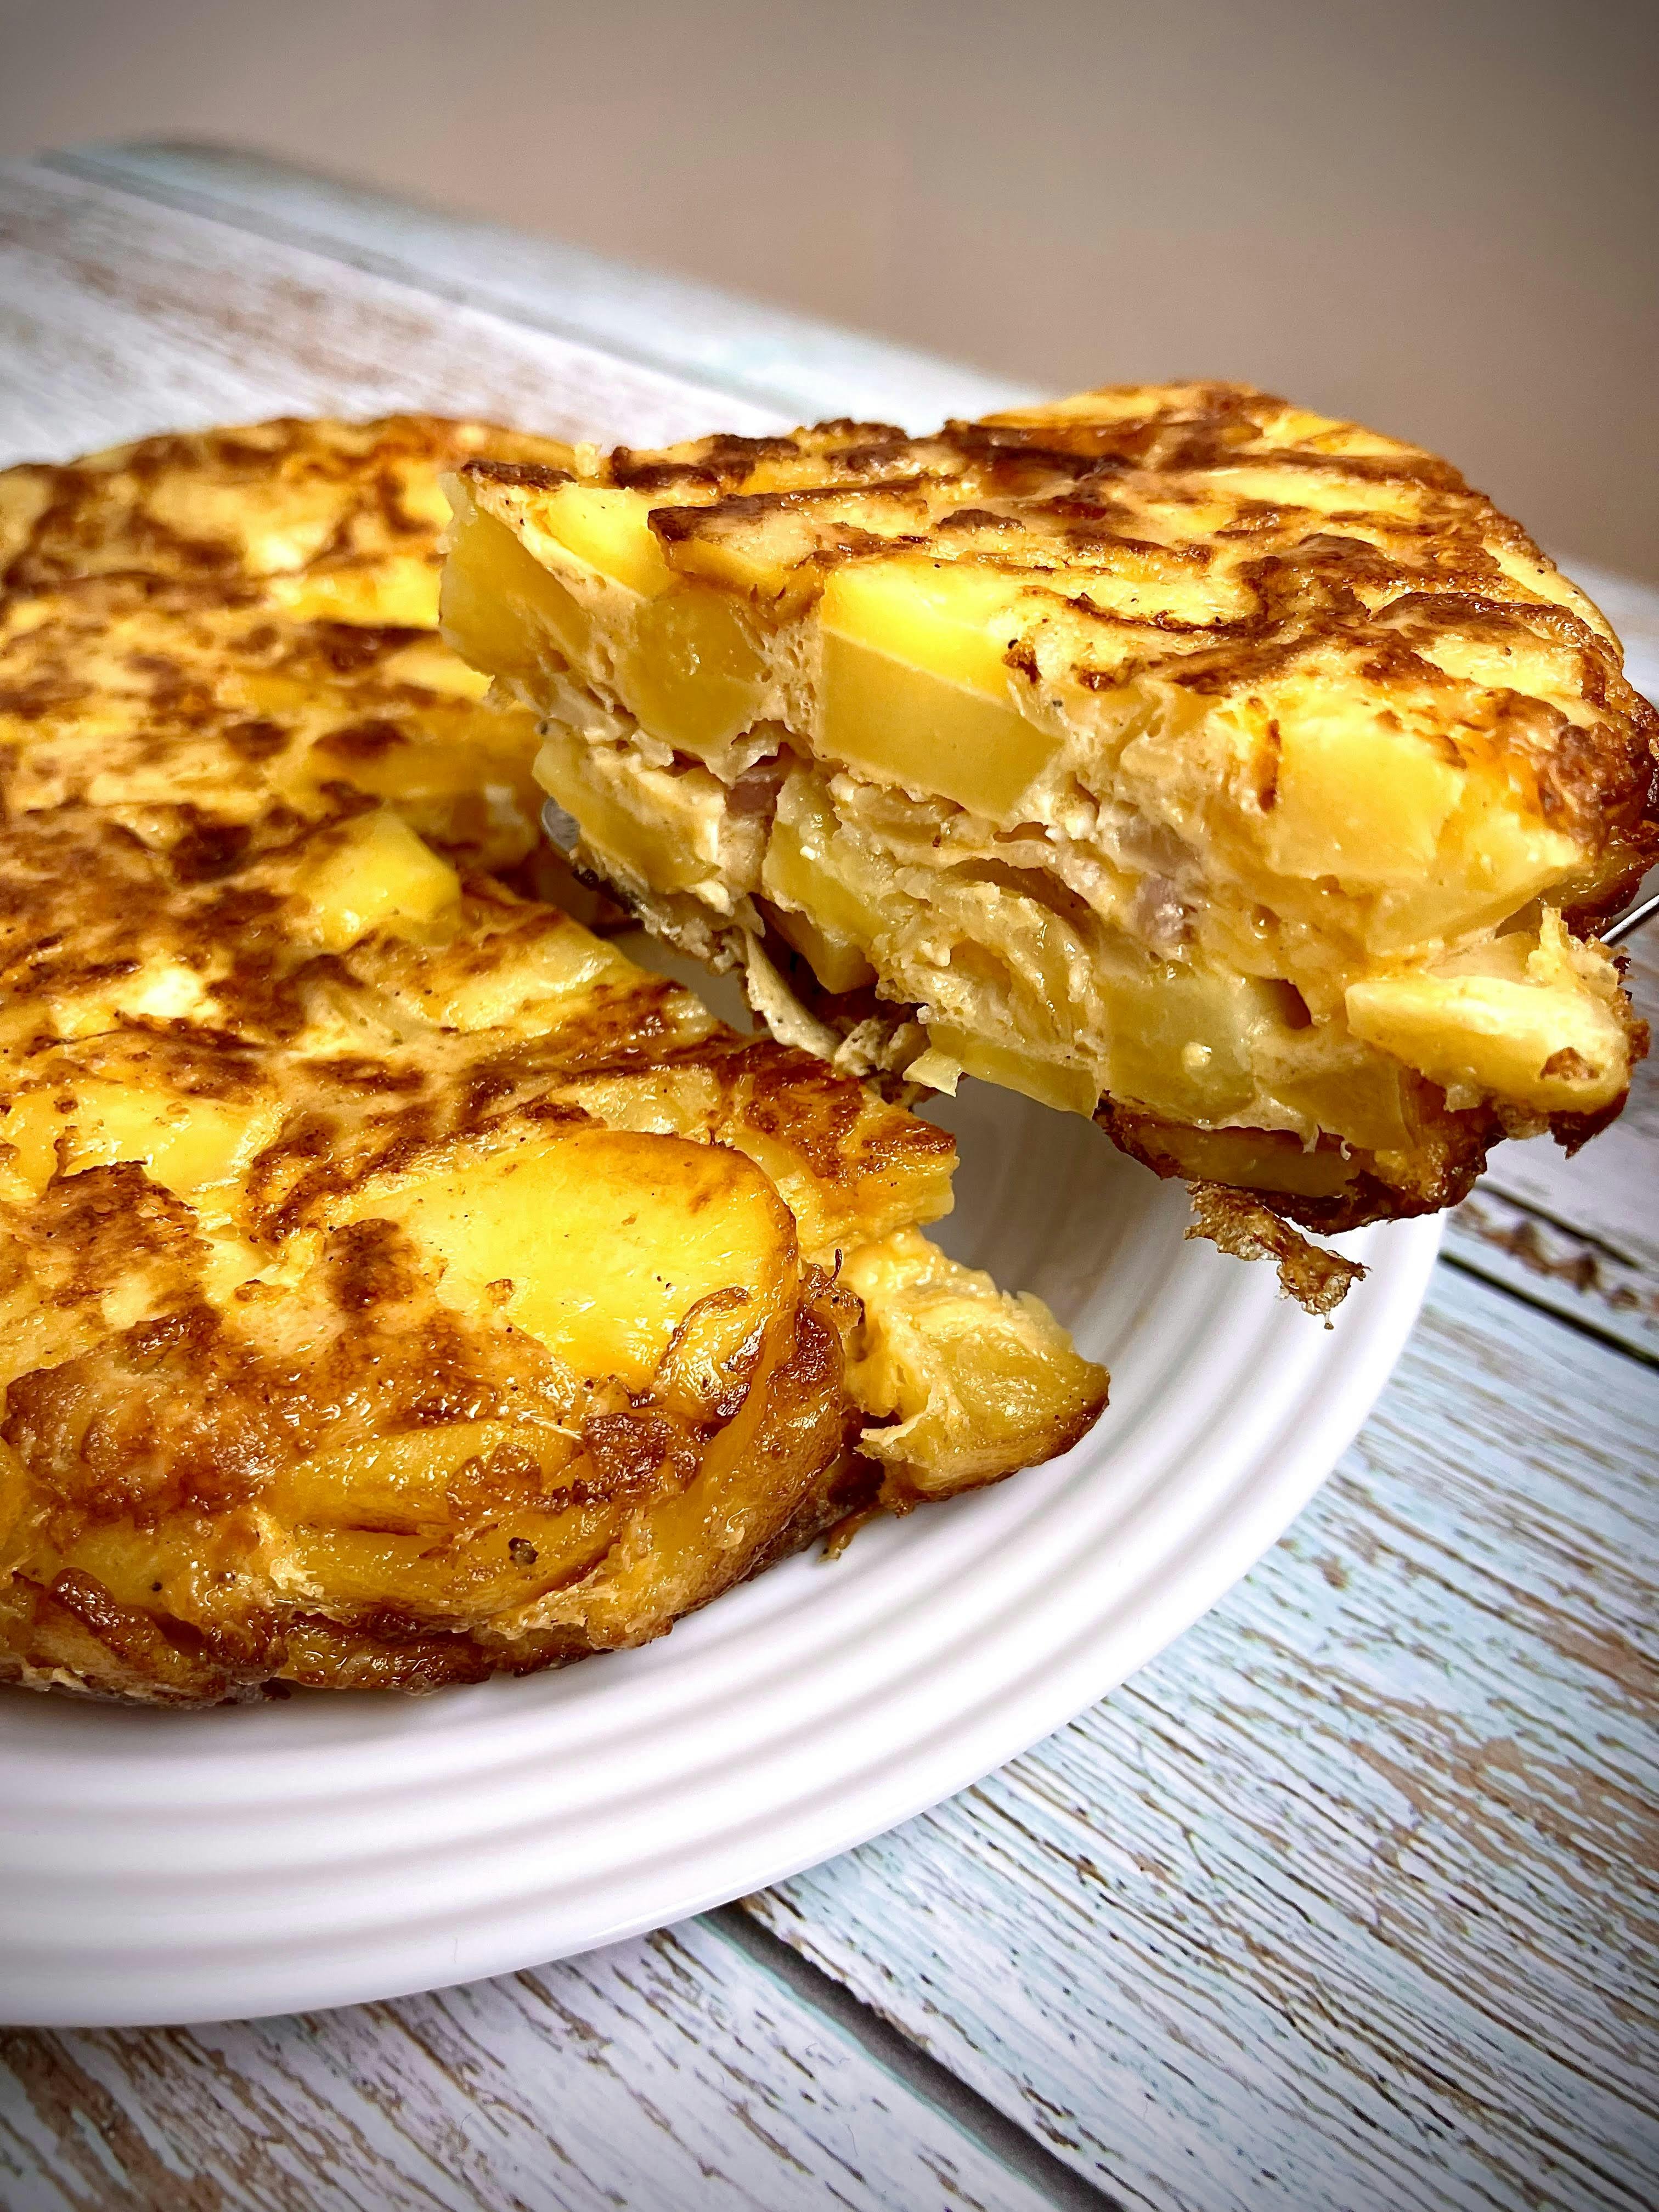 Picture for Cheese N' Bacon Stuffed Tortilla de Patatas 